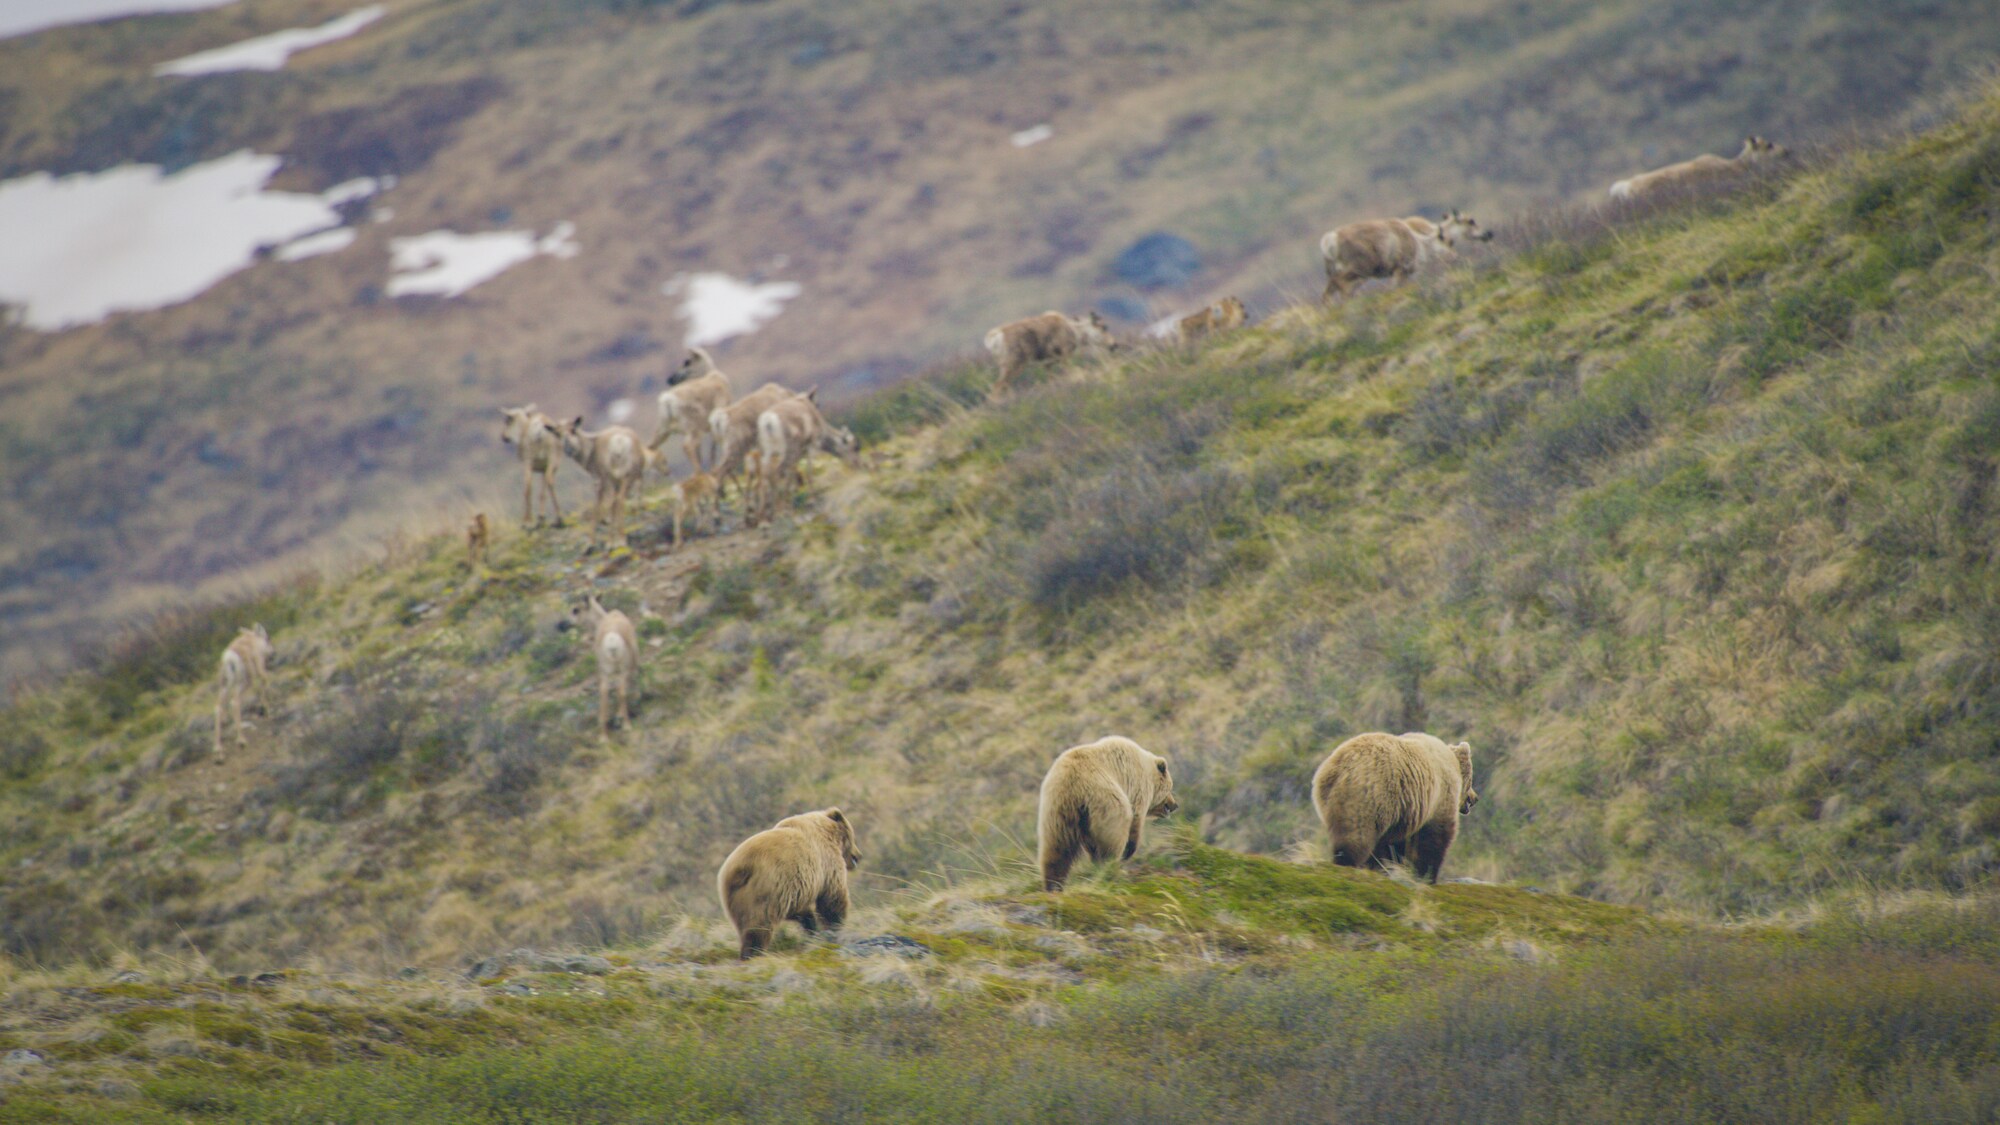 A Grizzly bear mother and her two young cubs hot on the trail of a Caribou herd. (National Geographic for Disney+)